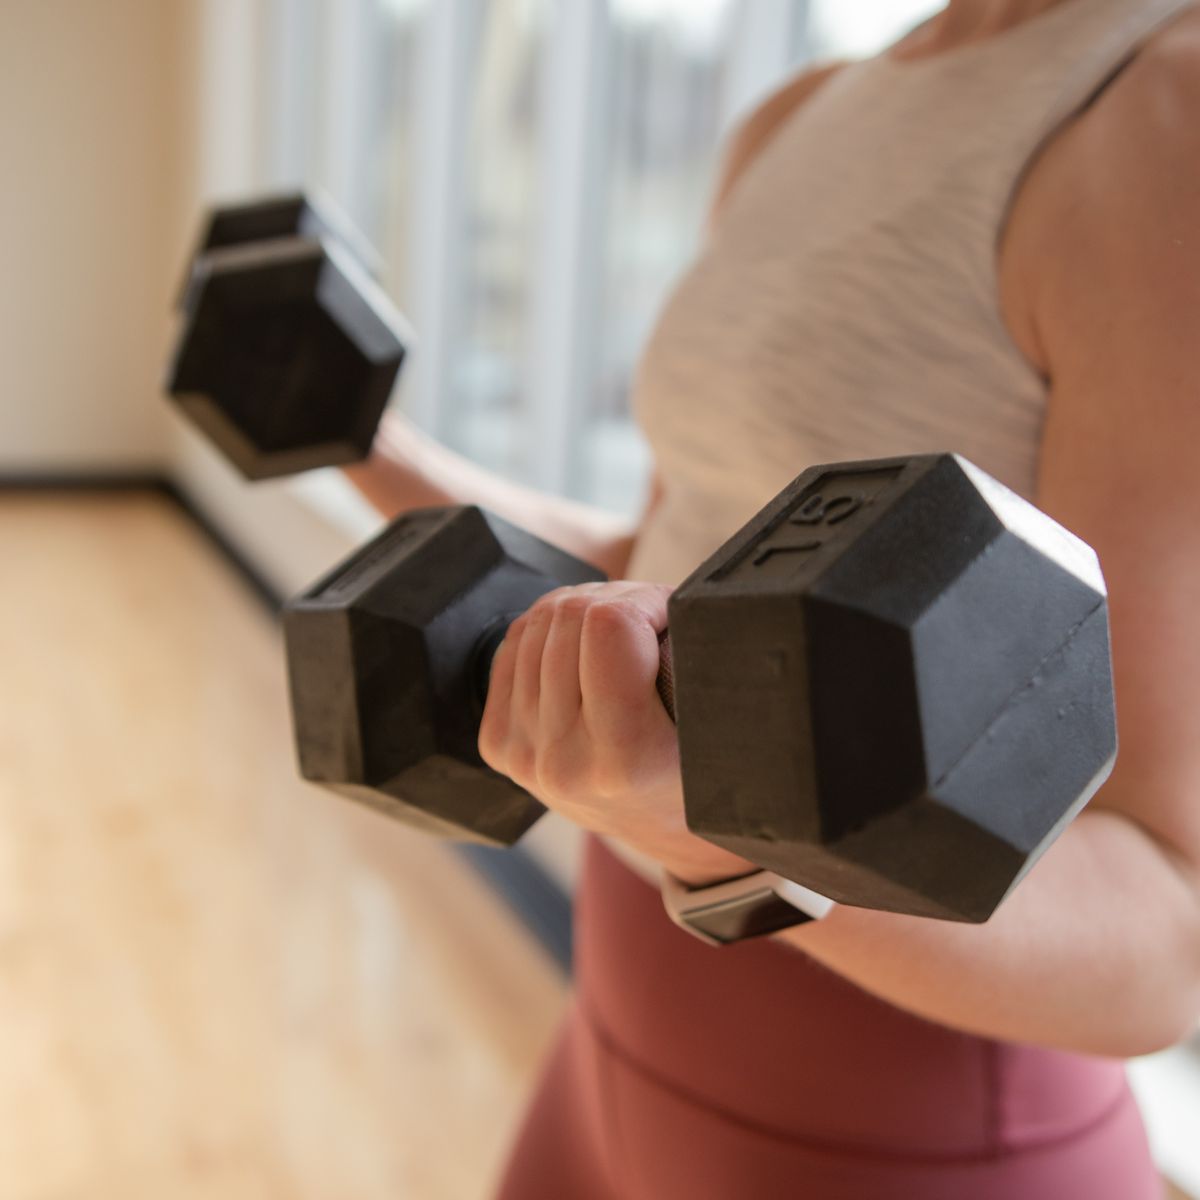 5 Benefits of Lifting Light Weights - Weight-Lifting for Weight Loss